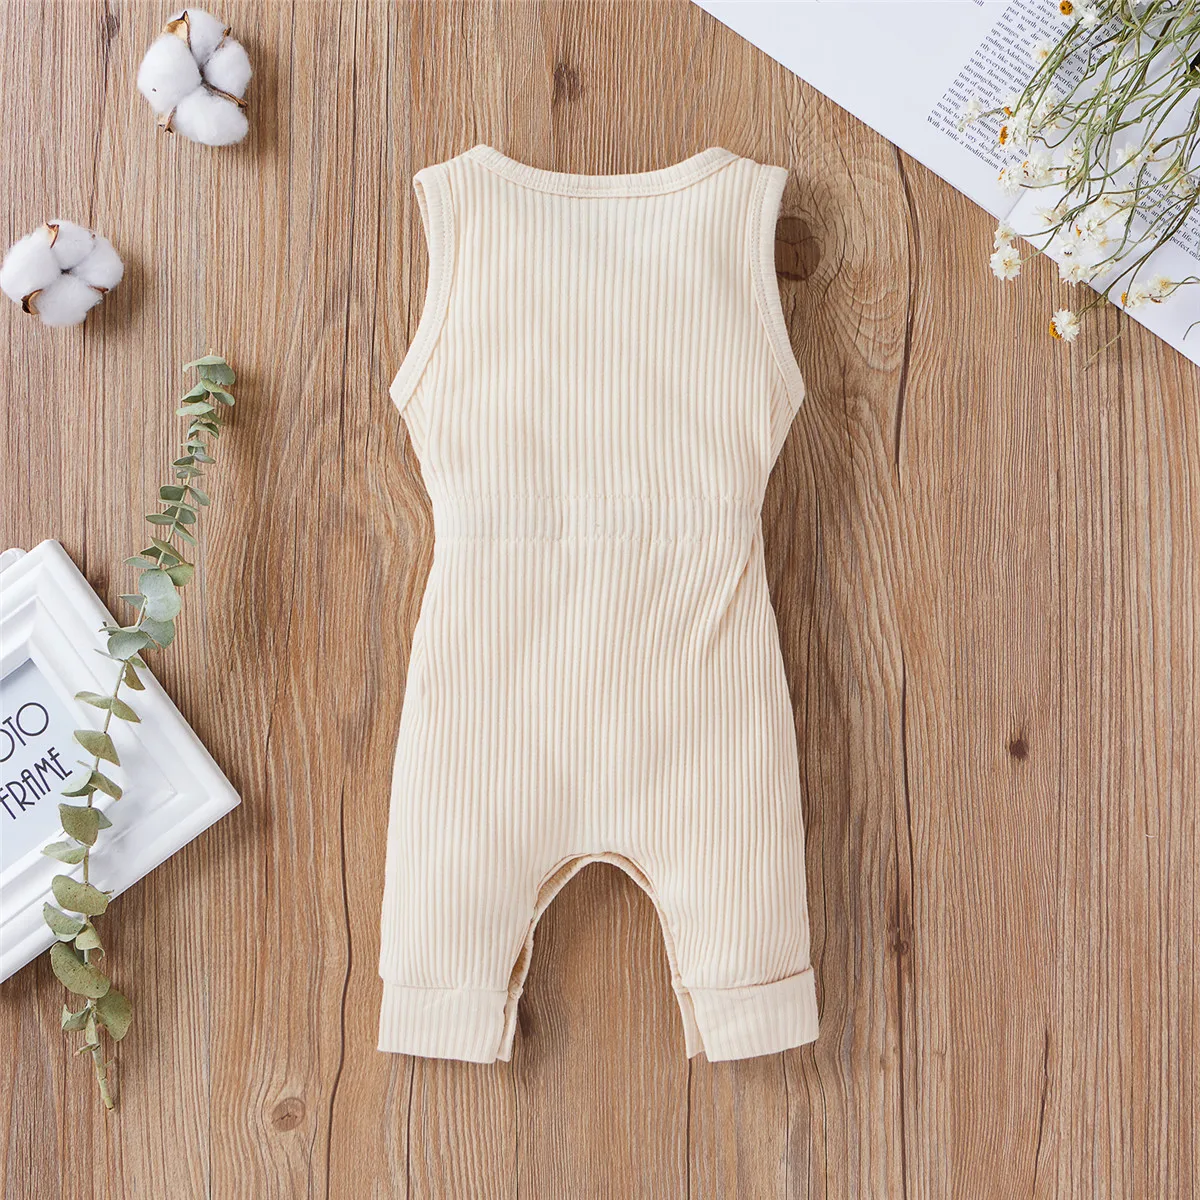 Newborn Knitting Romper Hooded  Newborn Baby Sleeveless Ribbed Solid Romper Jumpsuit Stylish Romper Jumpsuit for Kids Boys Girls 0-18M Baby Bodysuits are cool